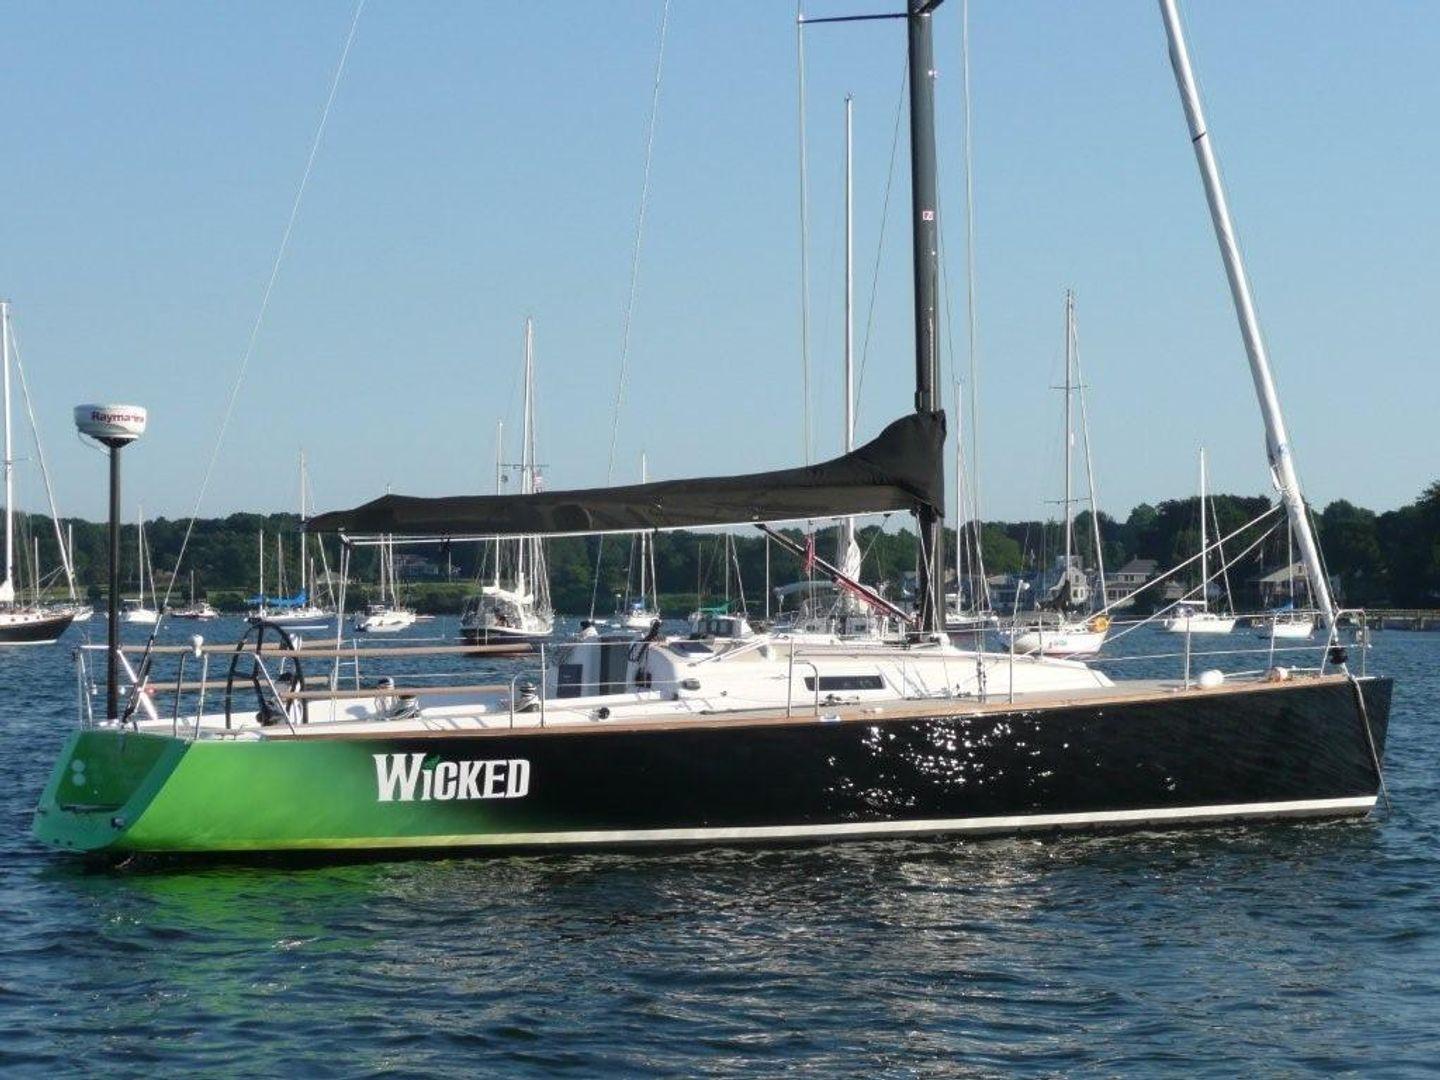 The original owners called the boat "Wicked", obviously named after the musical. They currently have a J/111 with the name "Wicked 2.0". 
